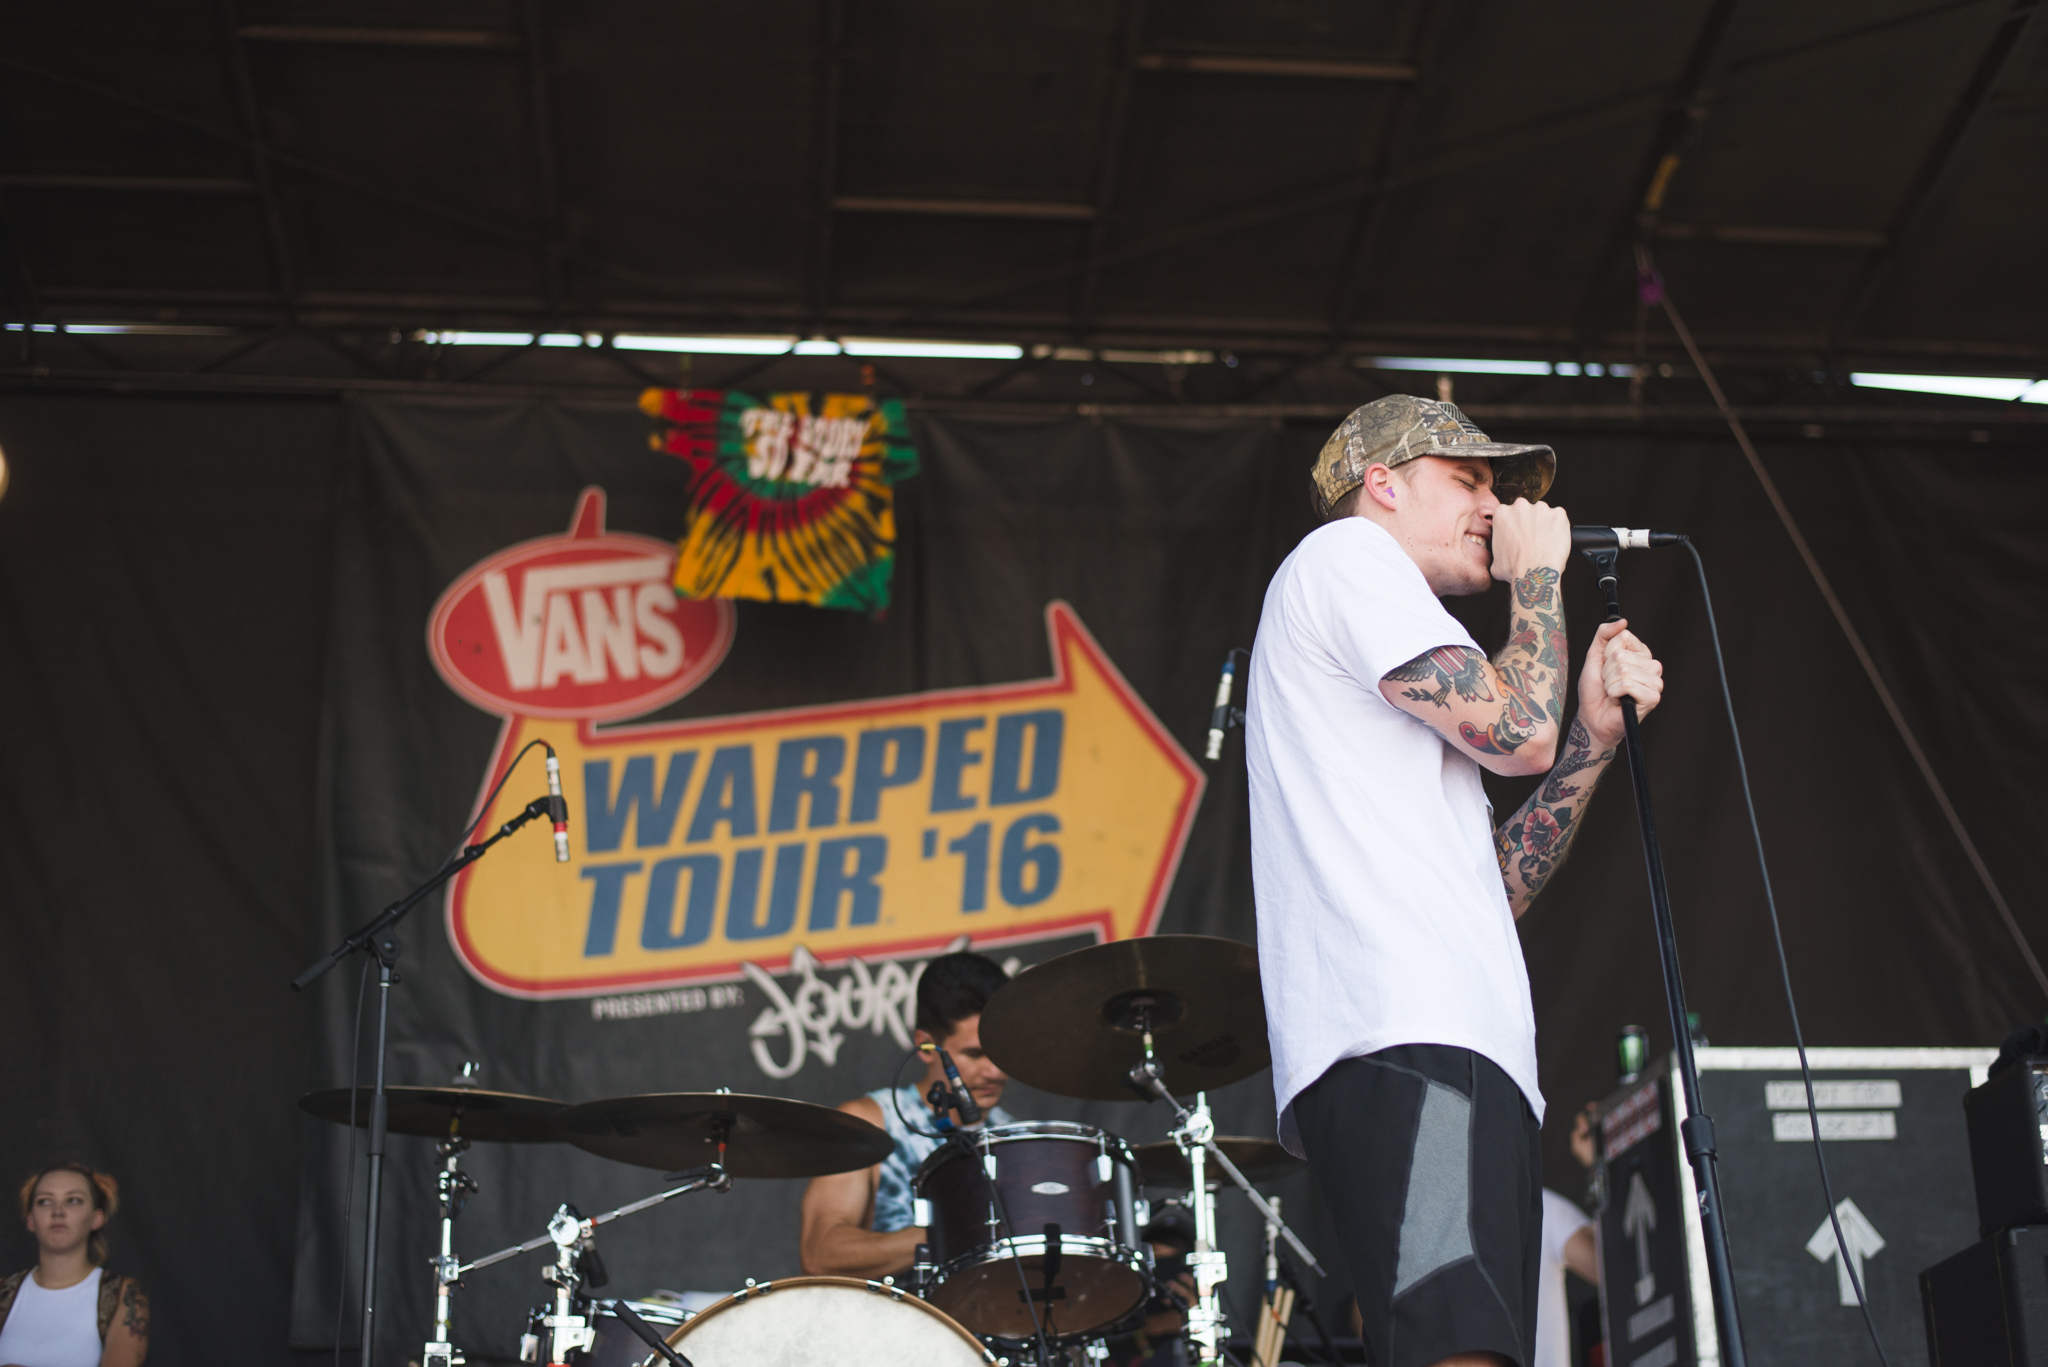 The Story So Far - Photo by Lindsey Blane